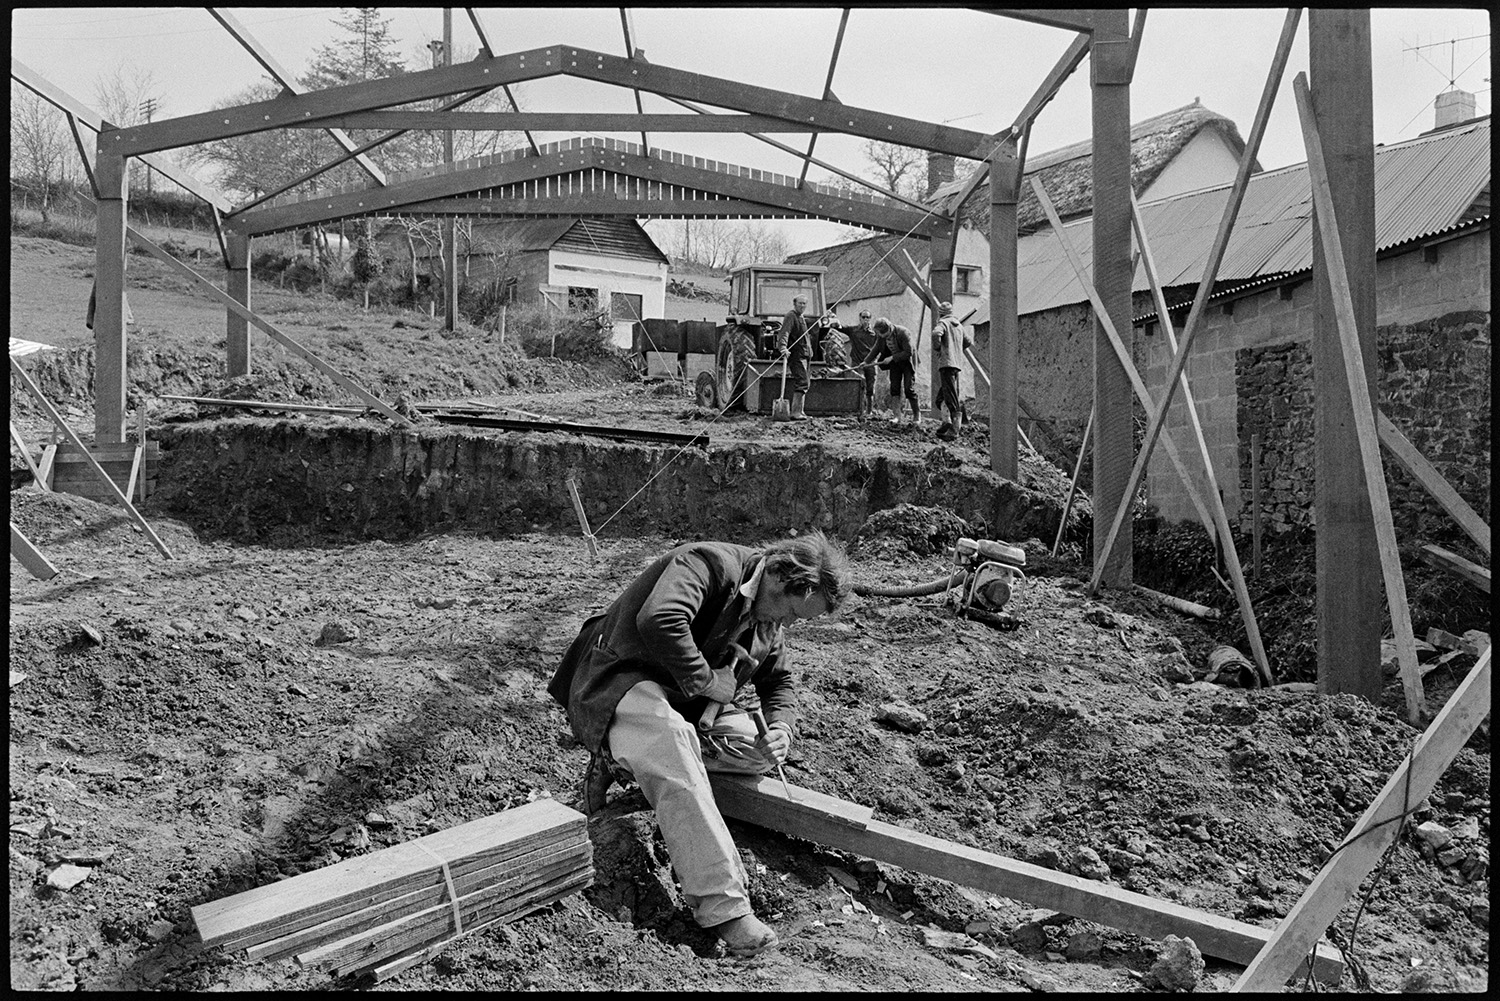 Men building metal and  timber framed barn shed. 
[Men building a barn with a timber and metal frame near New Bridge, Dolton. In the foreground a man is shaving a piece of wood with a chisel and hammer. In the background four men are stood by a tractor and link box. Other farm buildings are visible around the new barn.]